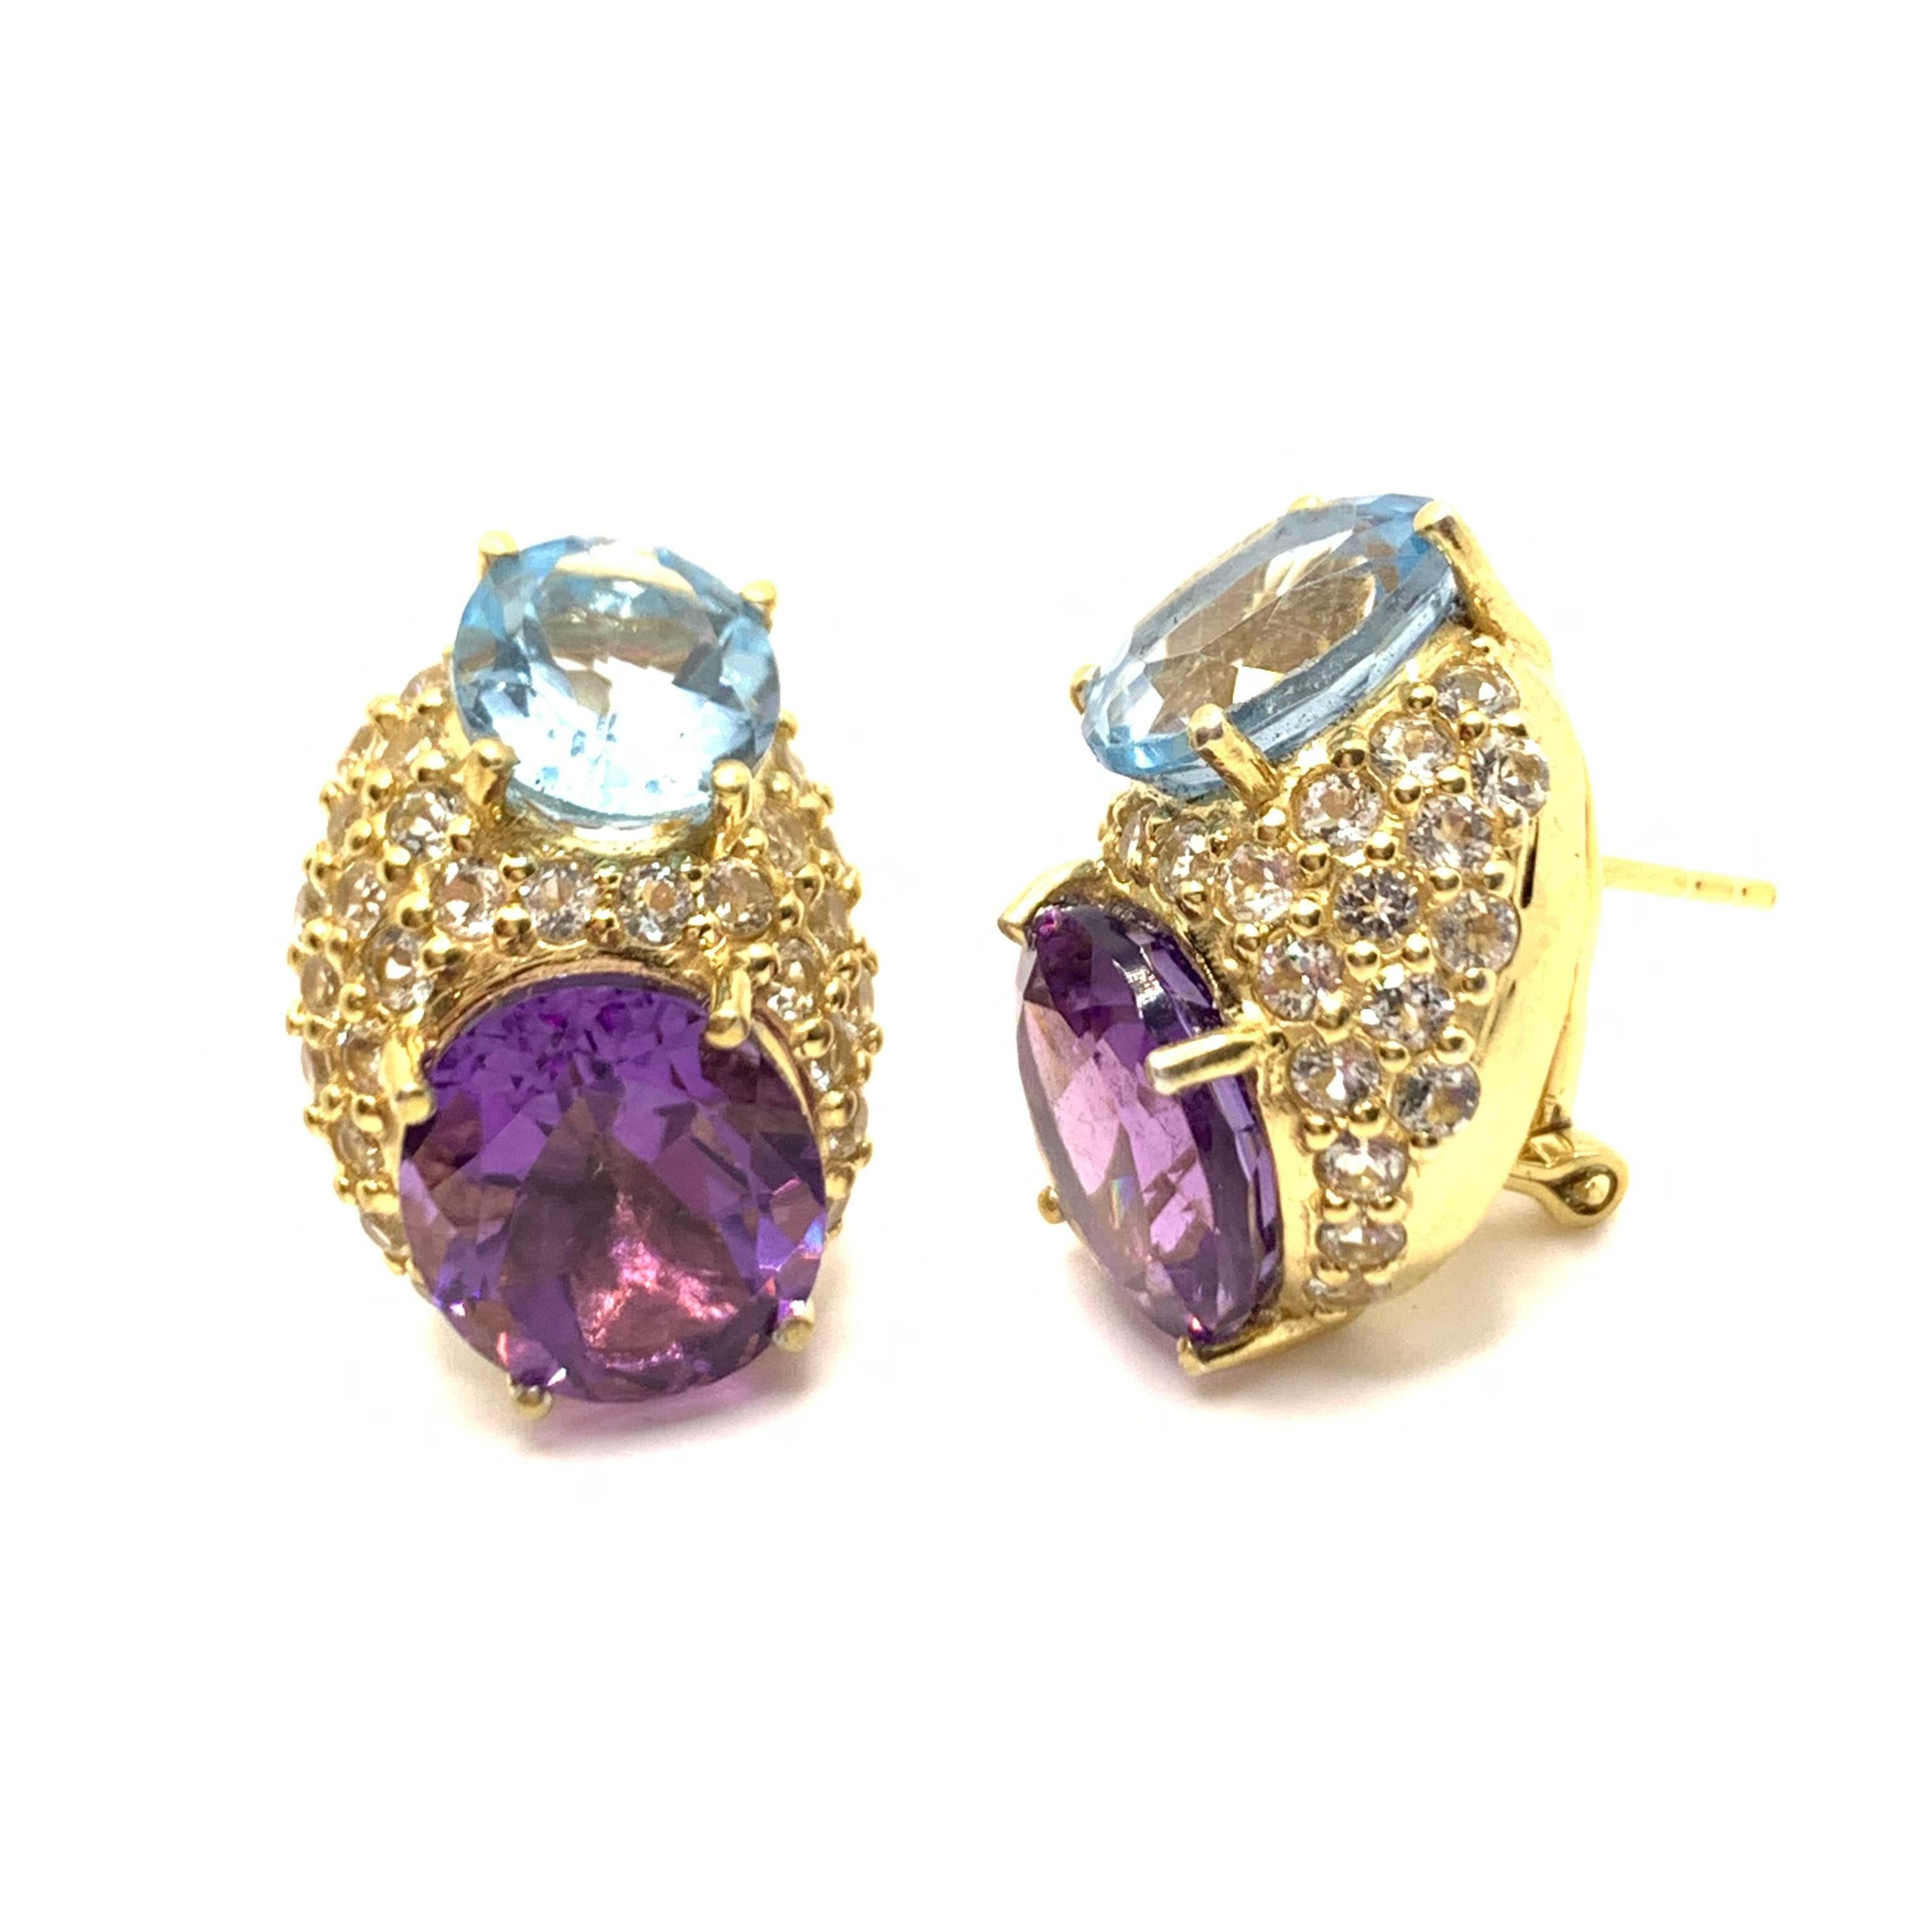 These stunning pair of earrings features a set of genuine sky blue topaz and Brazilian purple amethyst, adorned with 54 pieces of round white topaz, handset in 18k yellow gold vermeil over sterling silver. The facets from the oval stones together